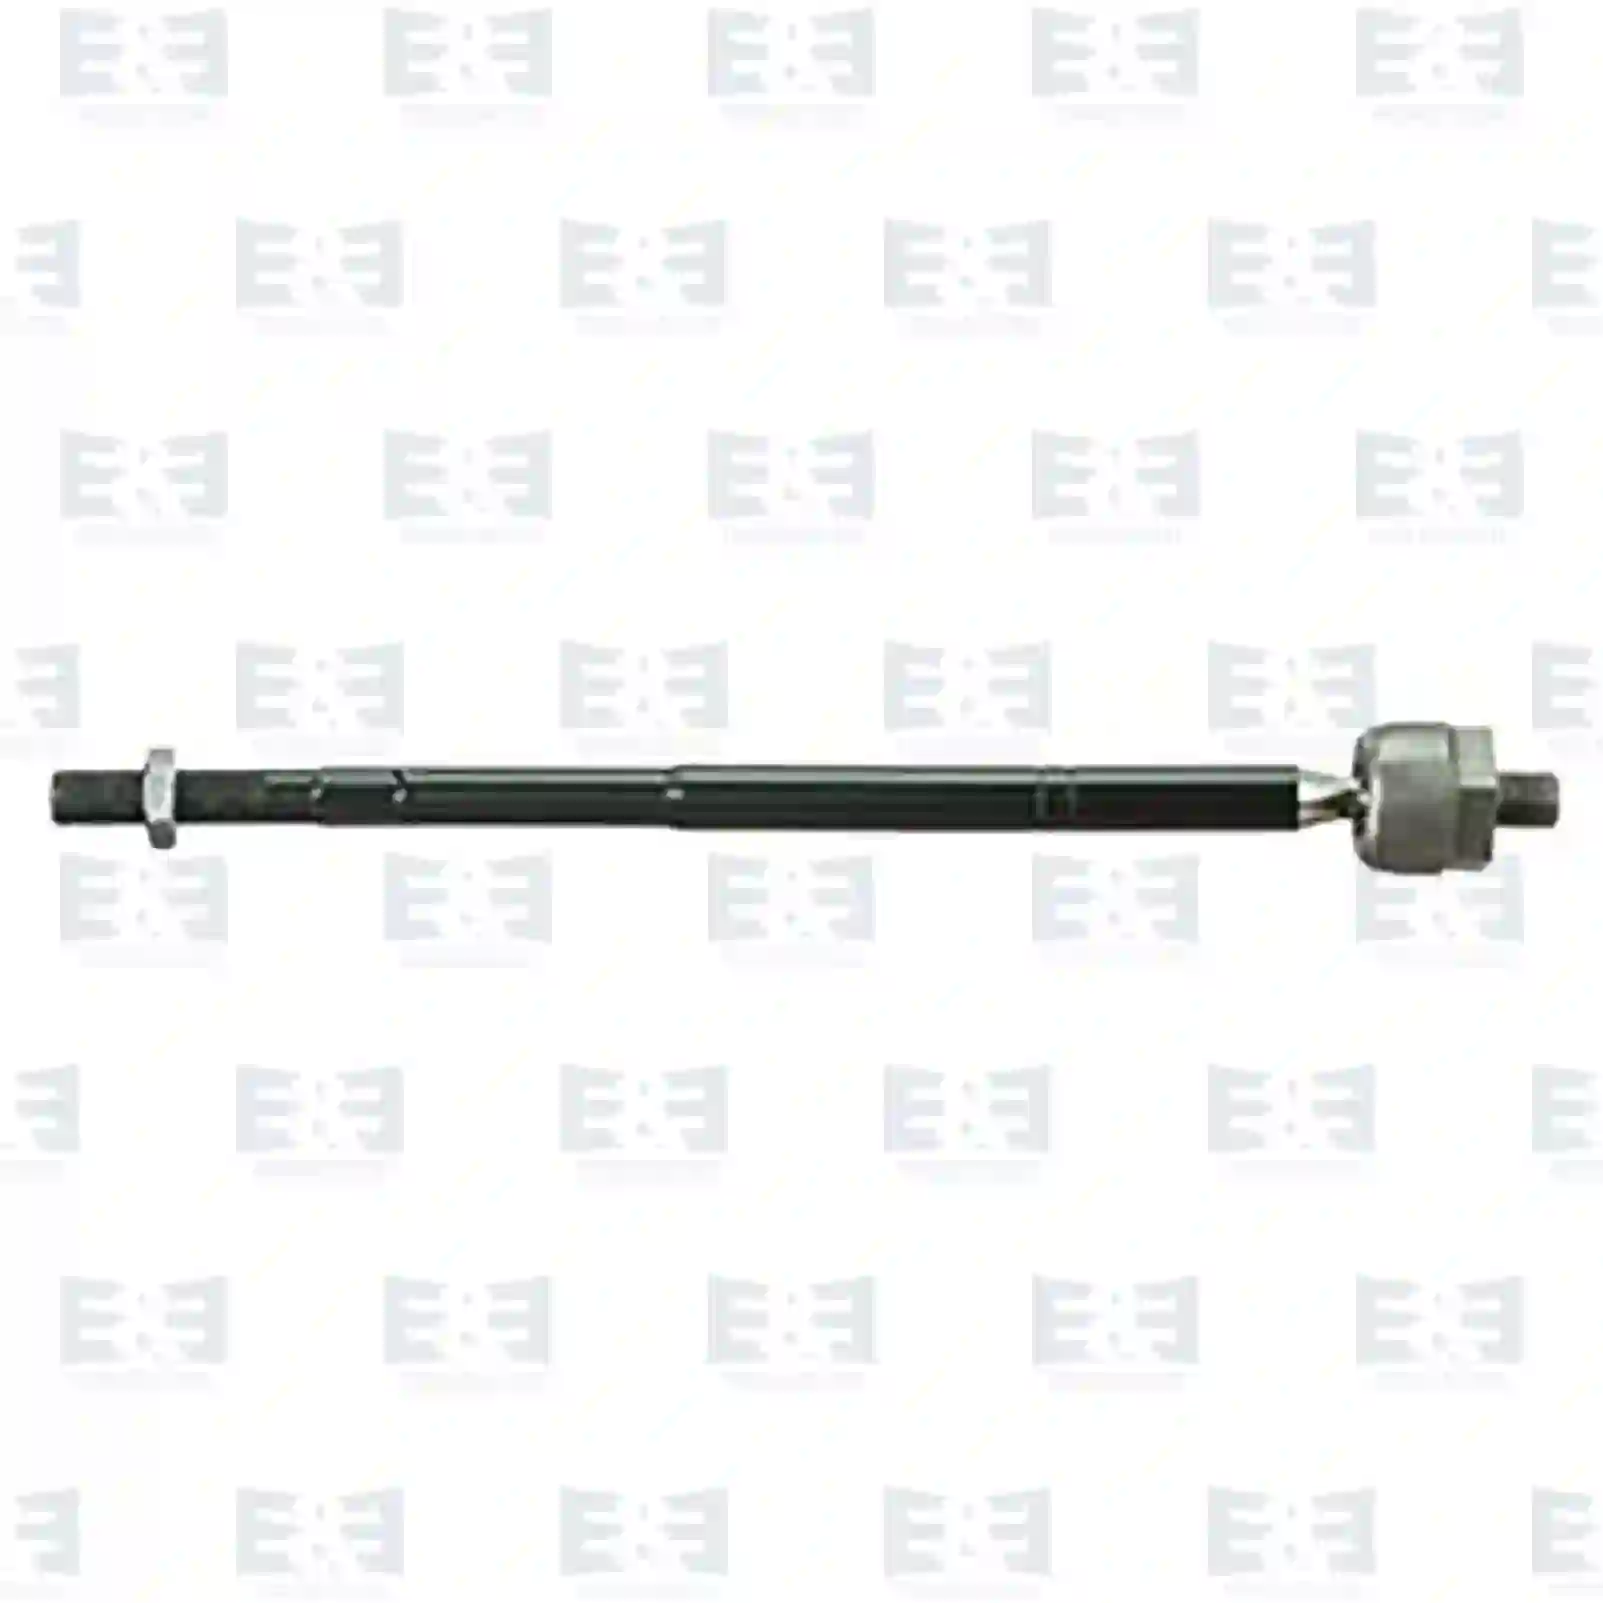 Axle joint, track rod, without rubber boots, 2E2270796, 1763991, BK21-3L519-AA, ||  2E2270796 E&E Truck Spare Parts | Truck Spare Parts, Auotomotive Spare Parts Axle joint, track rod, without rubber boots, 2E2270796, 1763991, BK21-3L519-AA, ||  2E2270796 E&E Truck Spare Parts | Truck Spare Parts, Auotomotive Spare Parts